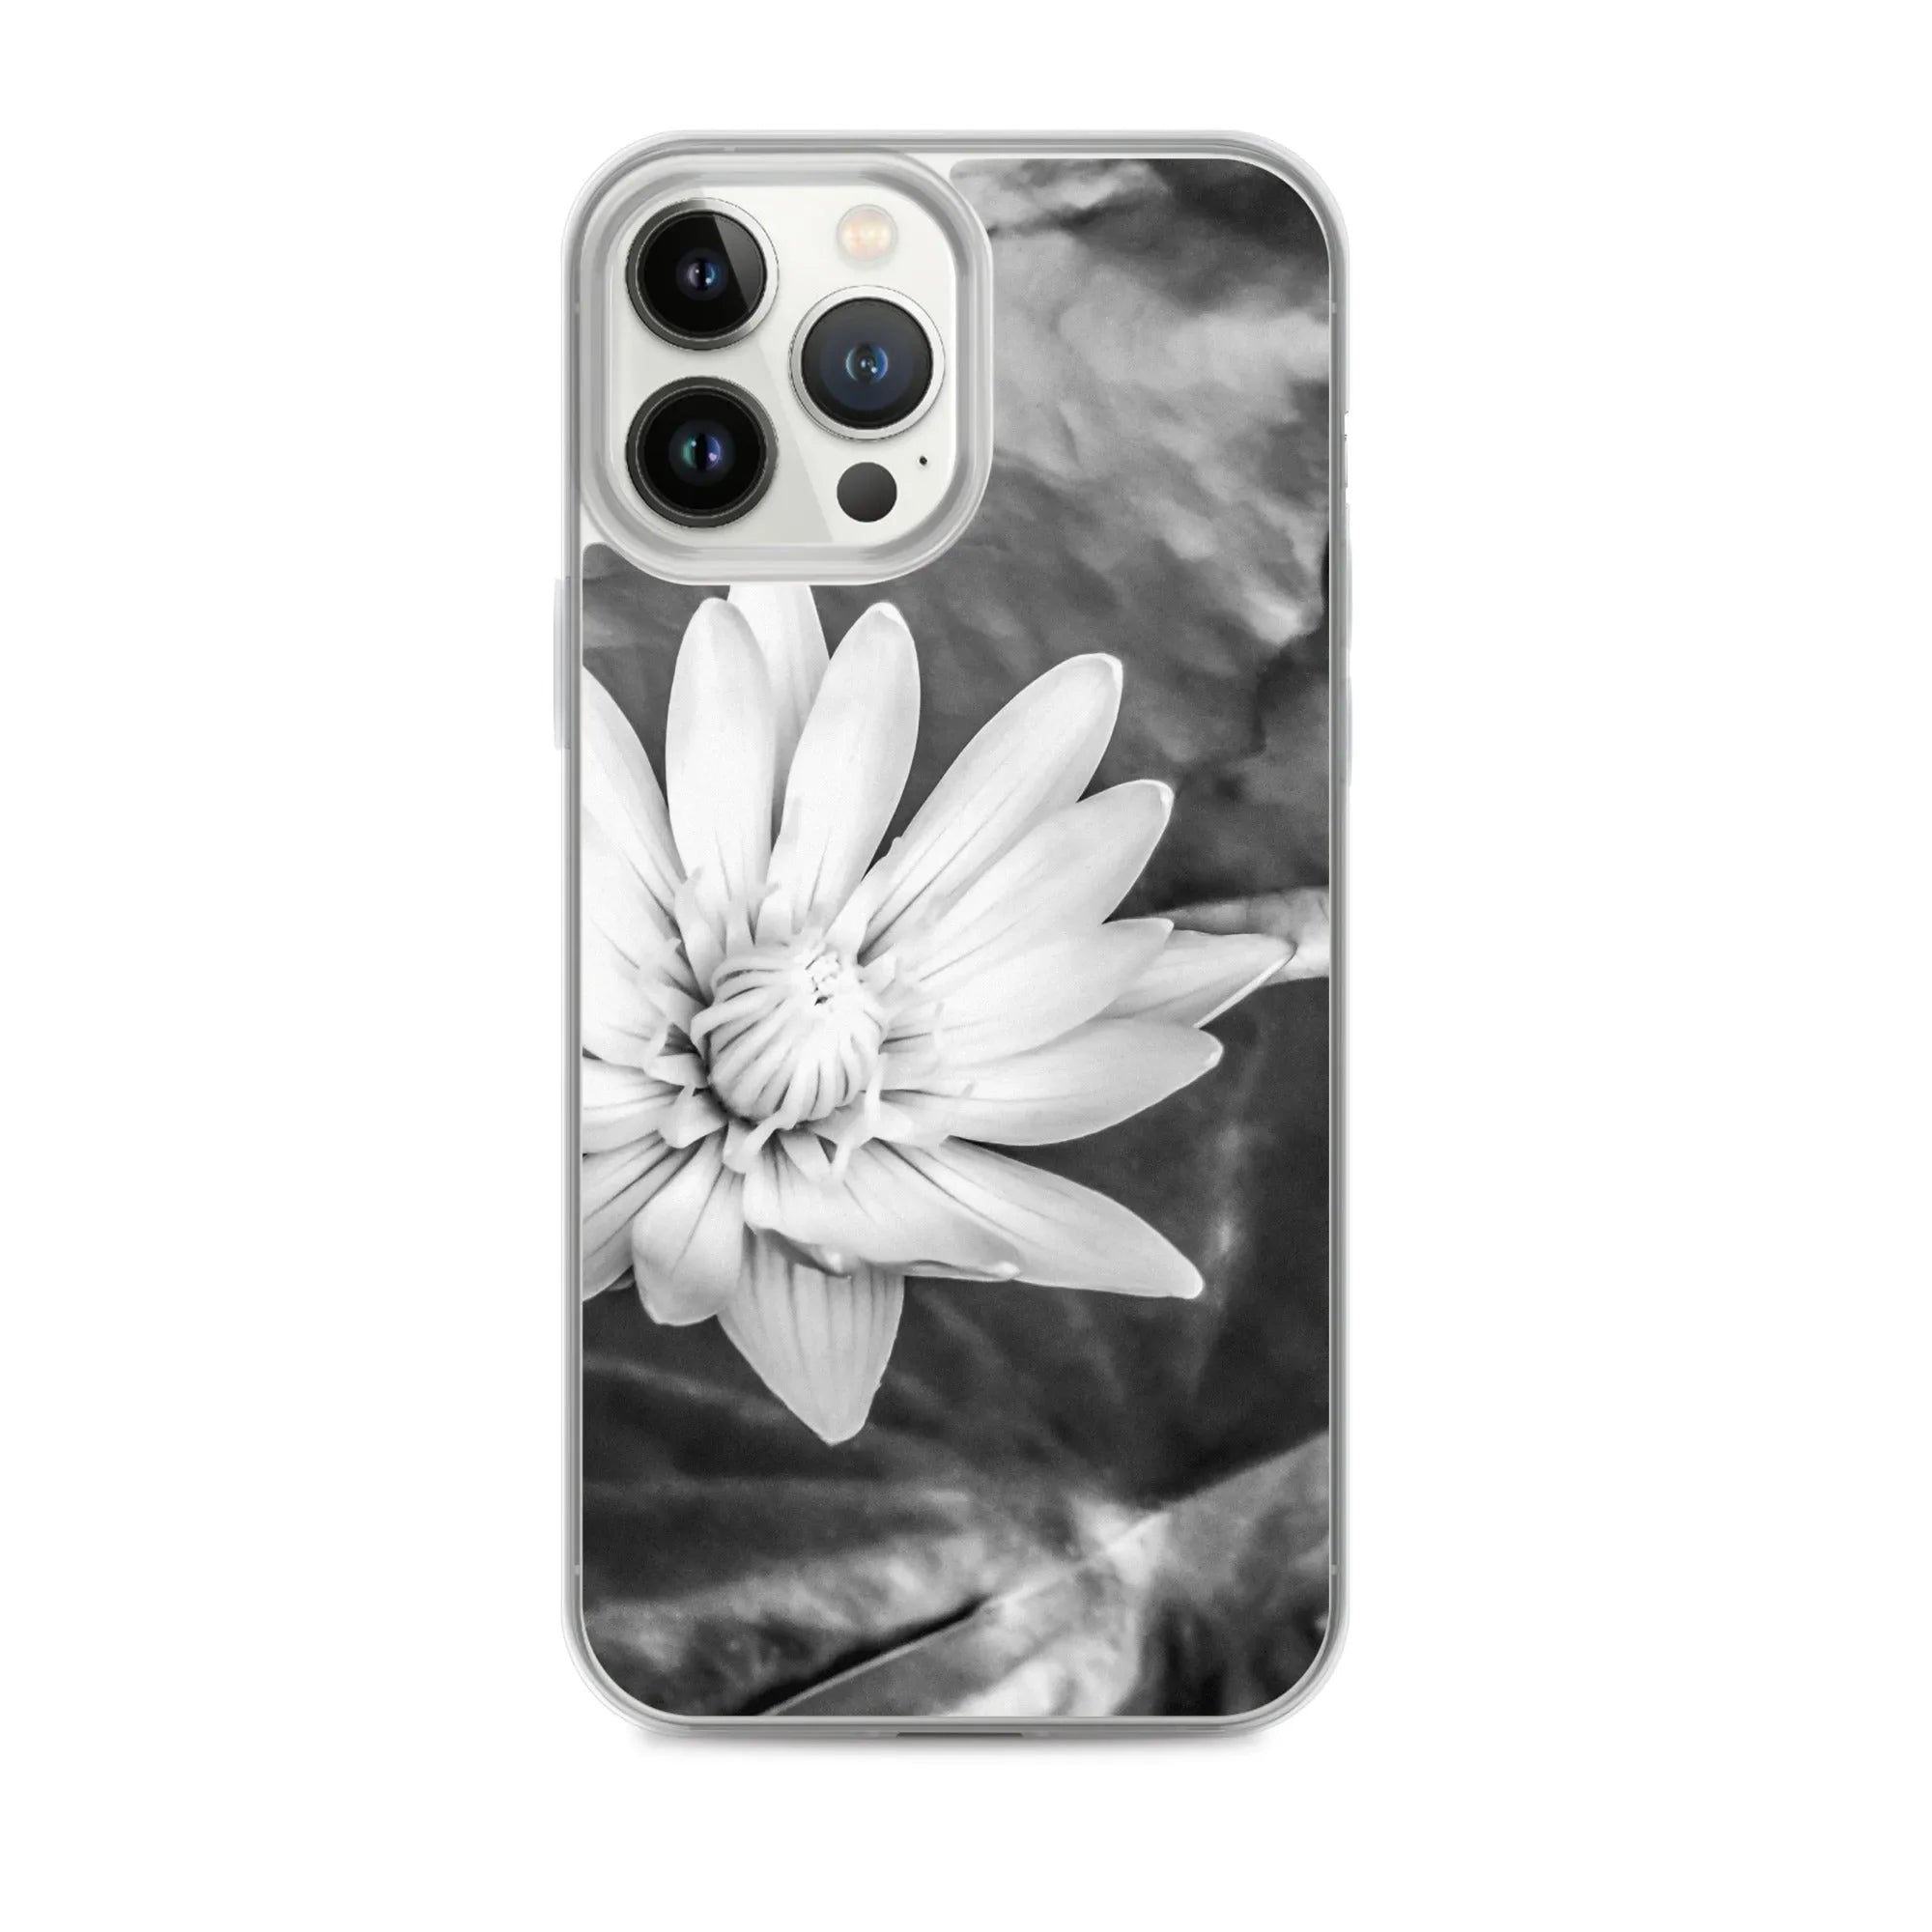 Breakthrough Floral Iphone Case - Black And White - Iphone 13 Pro Max - Mobile Phone Cases - Aesthetic Art